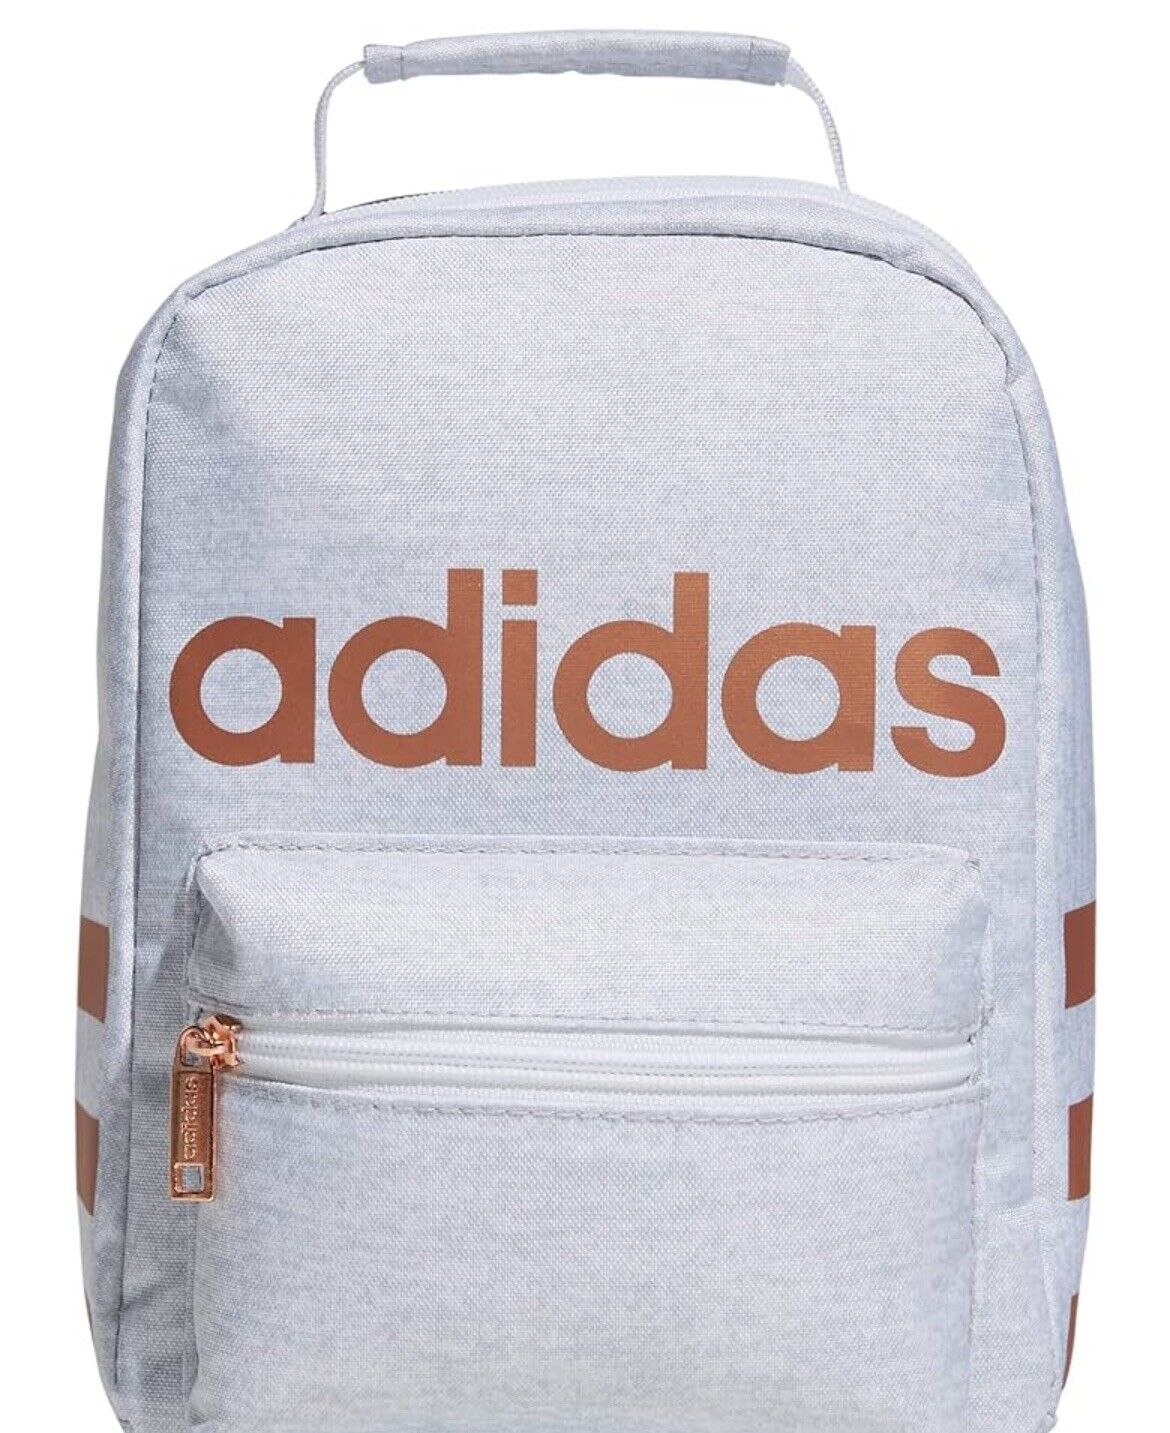 NWT ADIDAS SANTIAGO INSULATED LUNCH BAG- JERSEY WHITE & ROSE GOLD